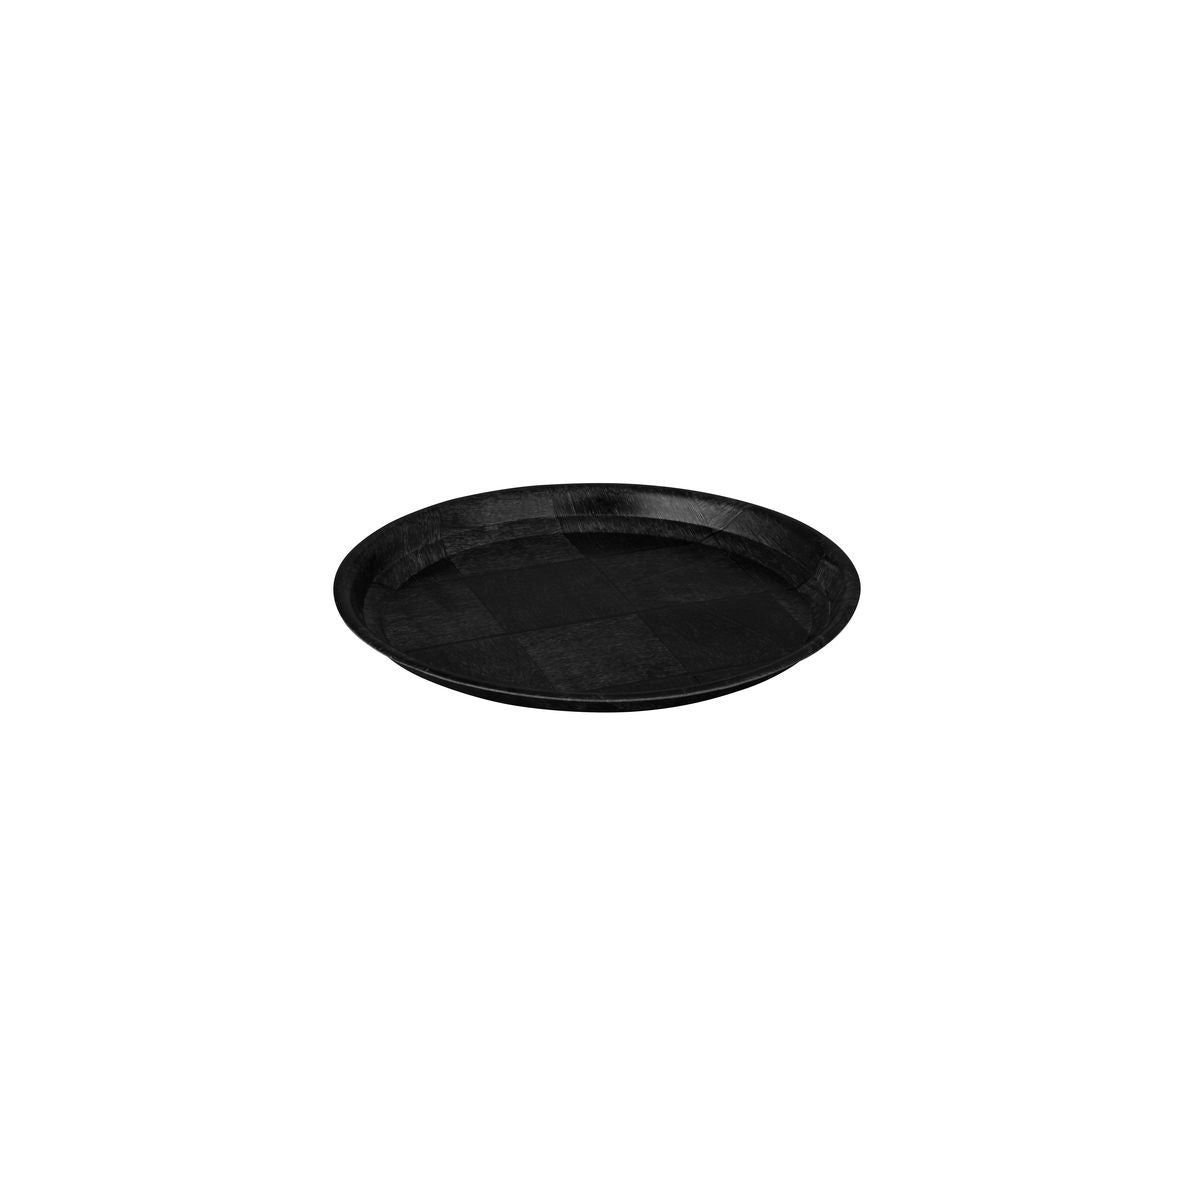 Round Tray, 150mm - Black Woven Wood from Trenton. Sold in boxes of 12. Hospitality quality at wholesale price with The Flying Fork! 